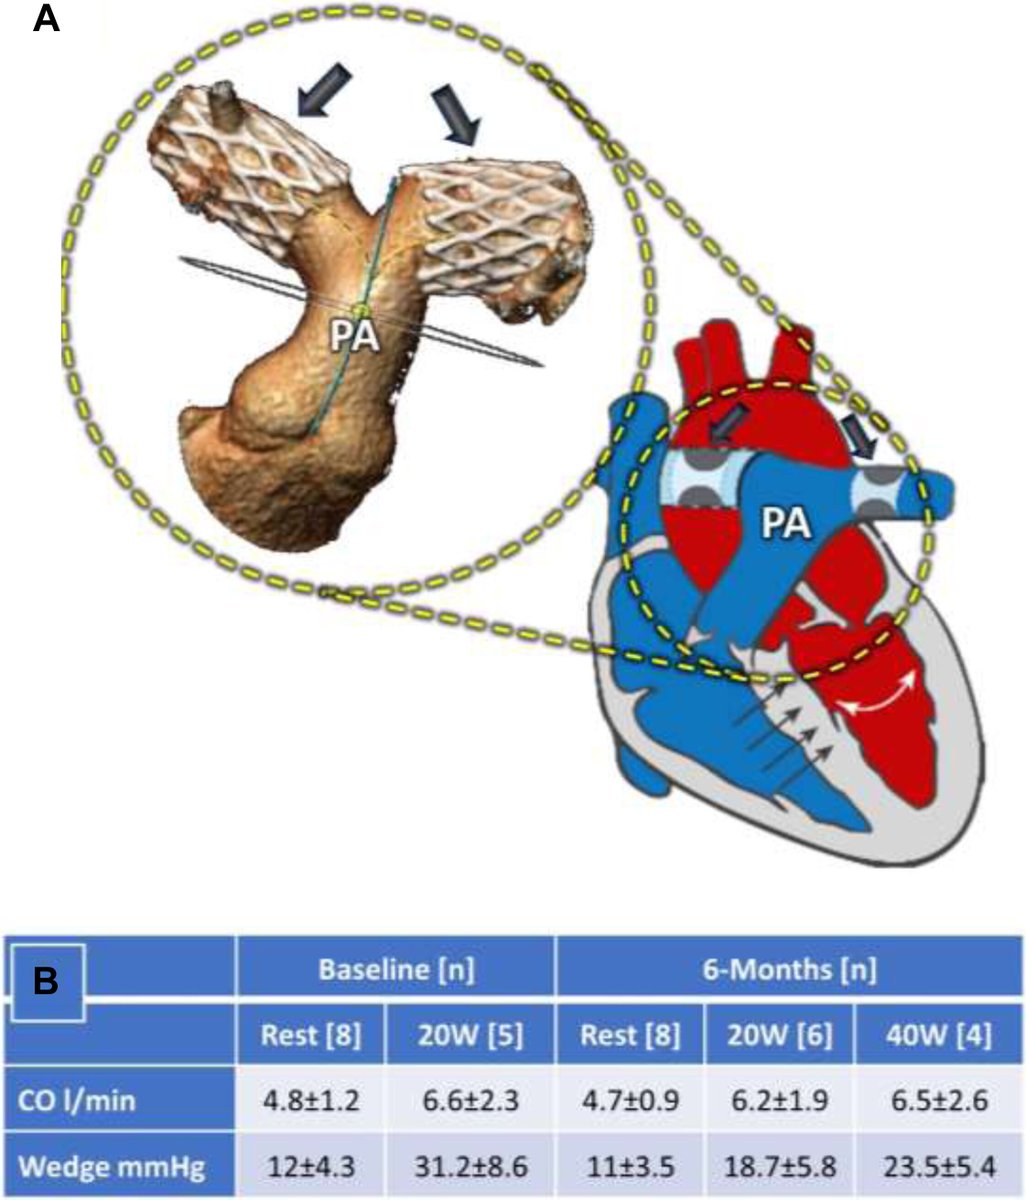 This research letter from Dr. Elchanan Bruckheimer, et al. describes initial results from a first-in-human trial of transcatheter pulmonary artery banding for #HFrEF. bit.ly/4bln0Sh #JACCBTS #HeartFailure #ACCHFT @spinneymd @VivekReddyMD